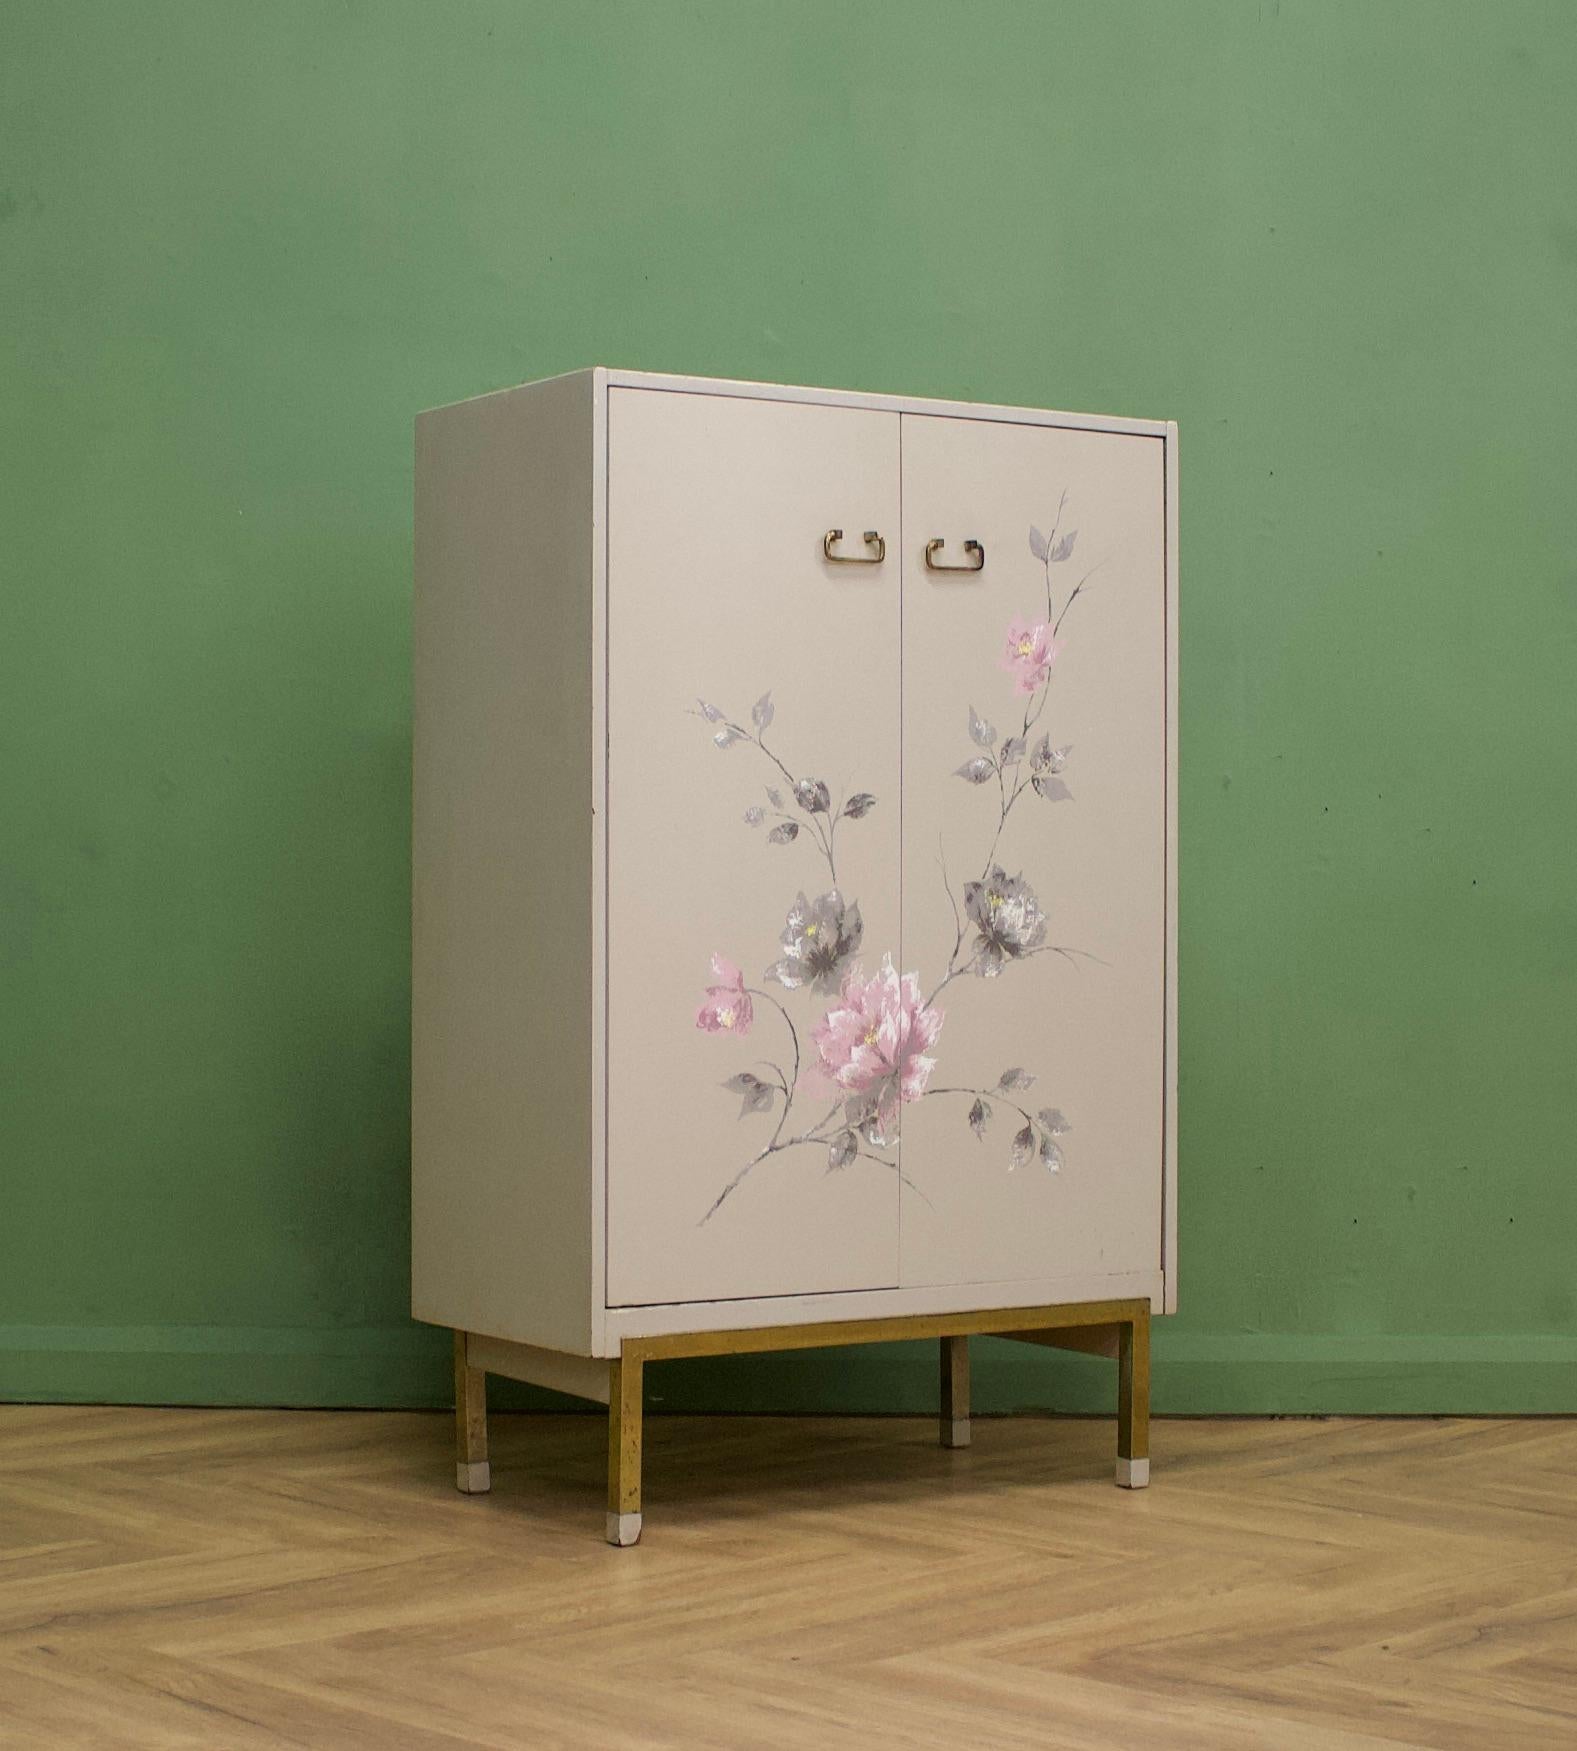 A mid century cupboard chest / linen cabinet - designed by VB Wilkins for G Plan - 1960's
Featuring a factory painted clematis flower design
Internally there are two drawers and two shelves
The legs are metal 